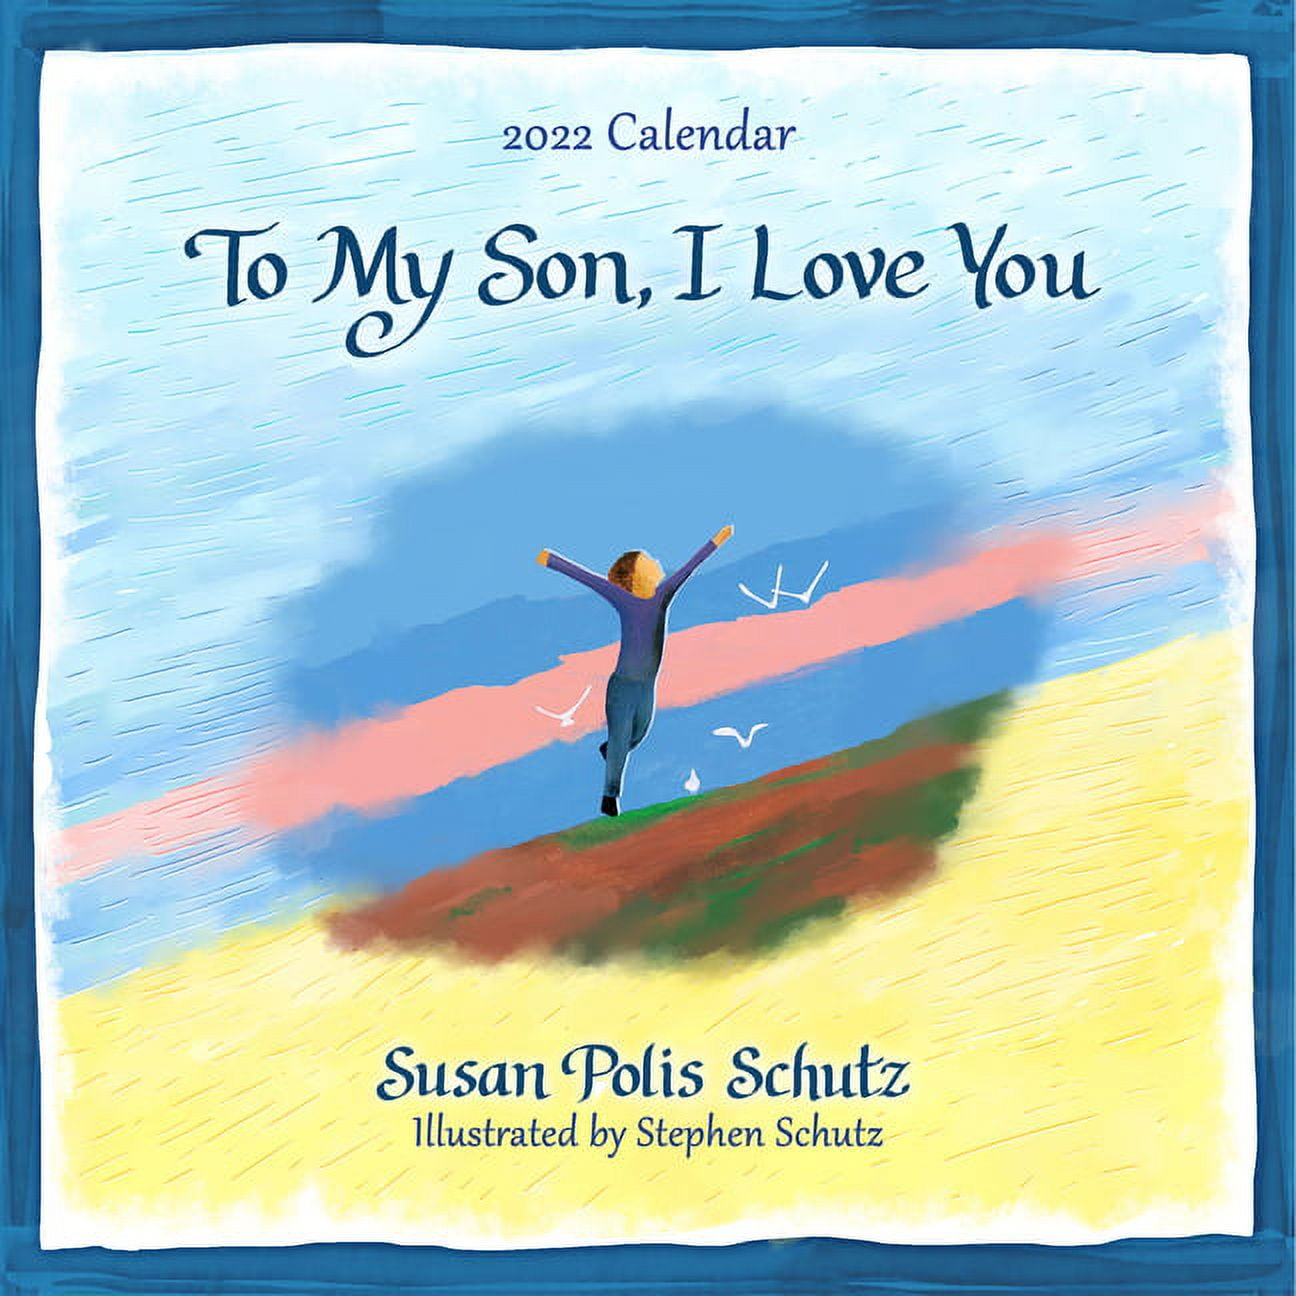 For You and Your New Baby” by Susan Polis Schutz — Blue Mountain Arts